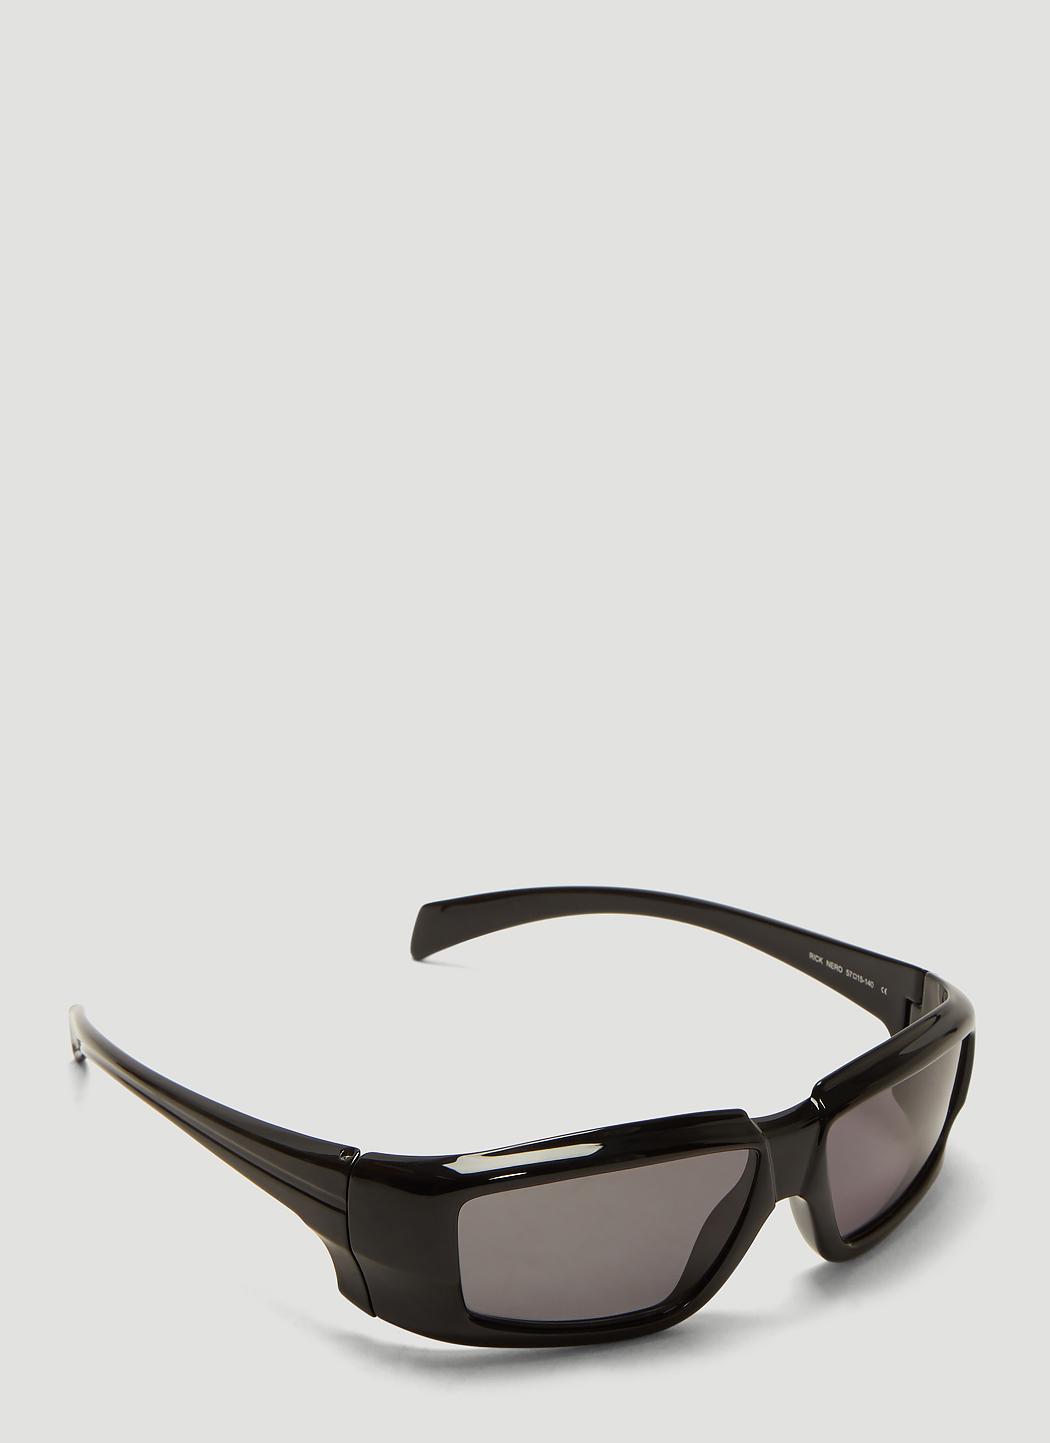 Rick Owens Synthetic Larry Sunglasses In Black for Men - Lyst